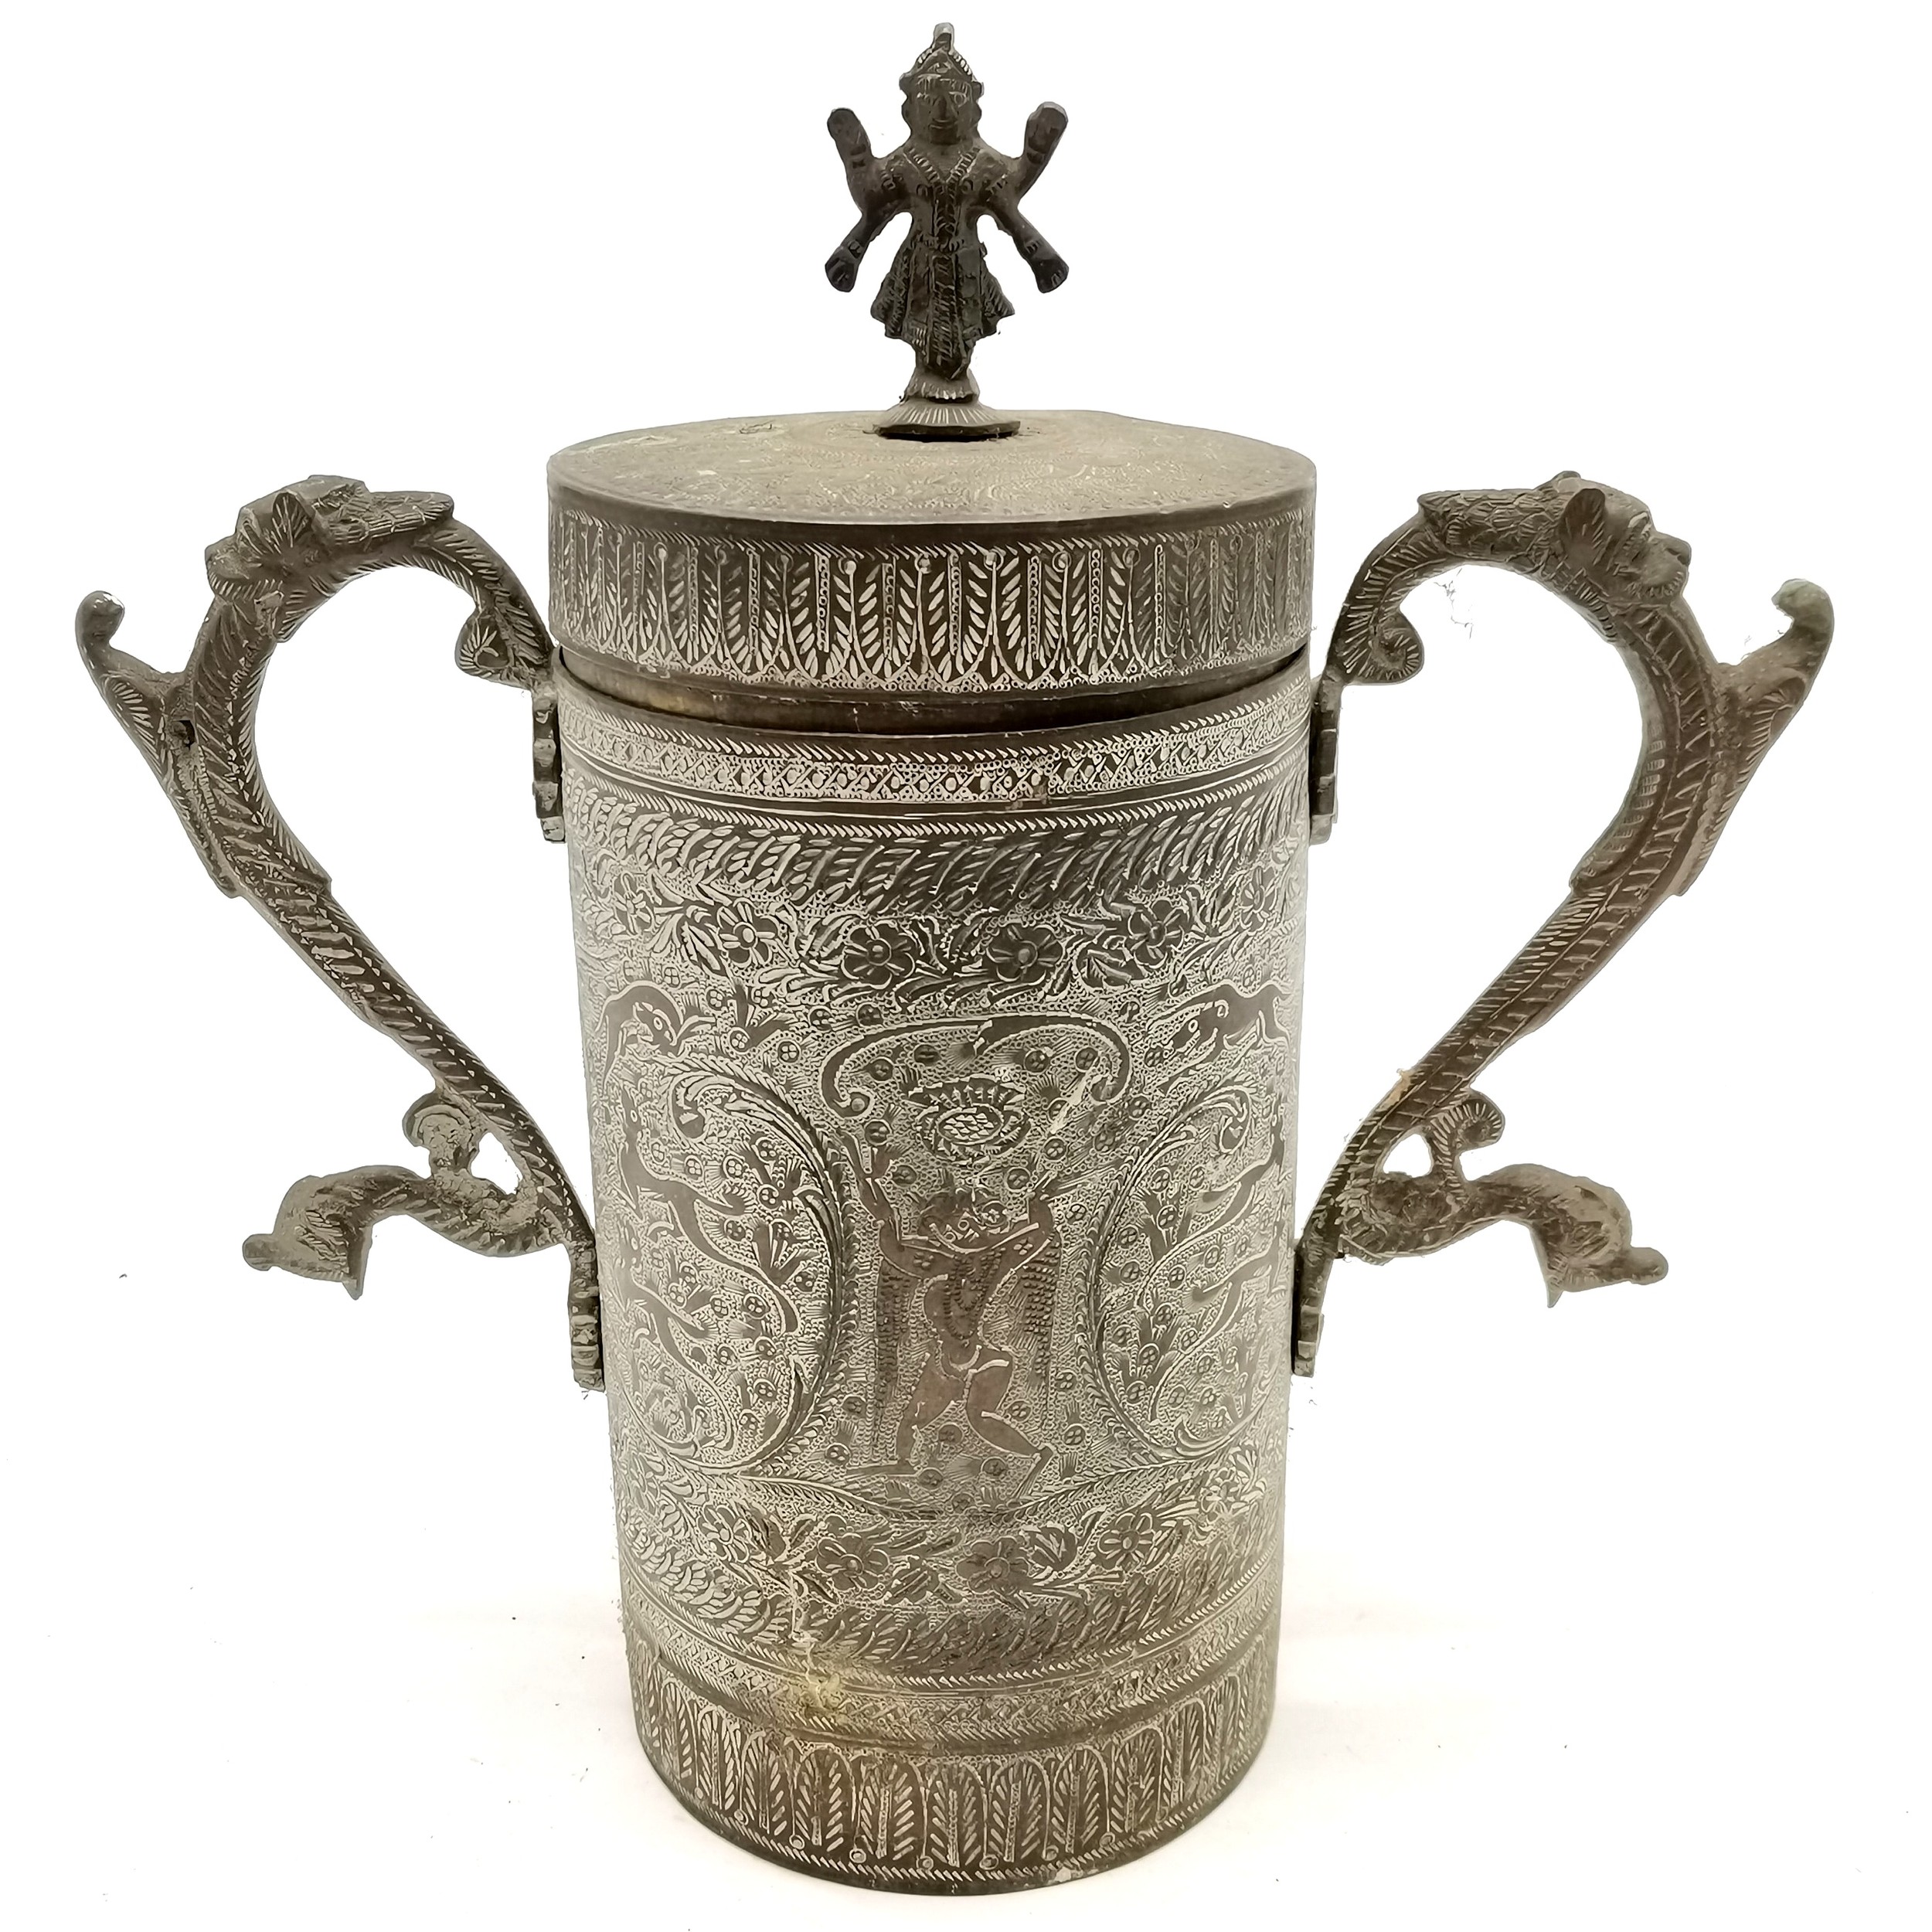 Vintage Indian brass 2 handled cylindrical vessel with lid adorned with deity finial and has - Image 3 of 3